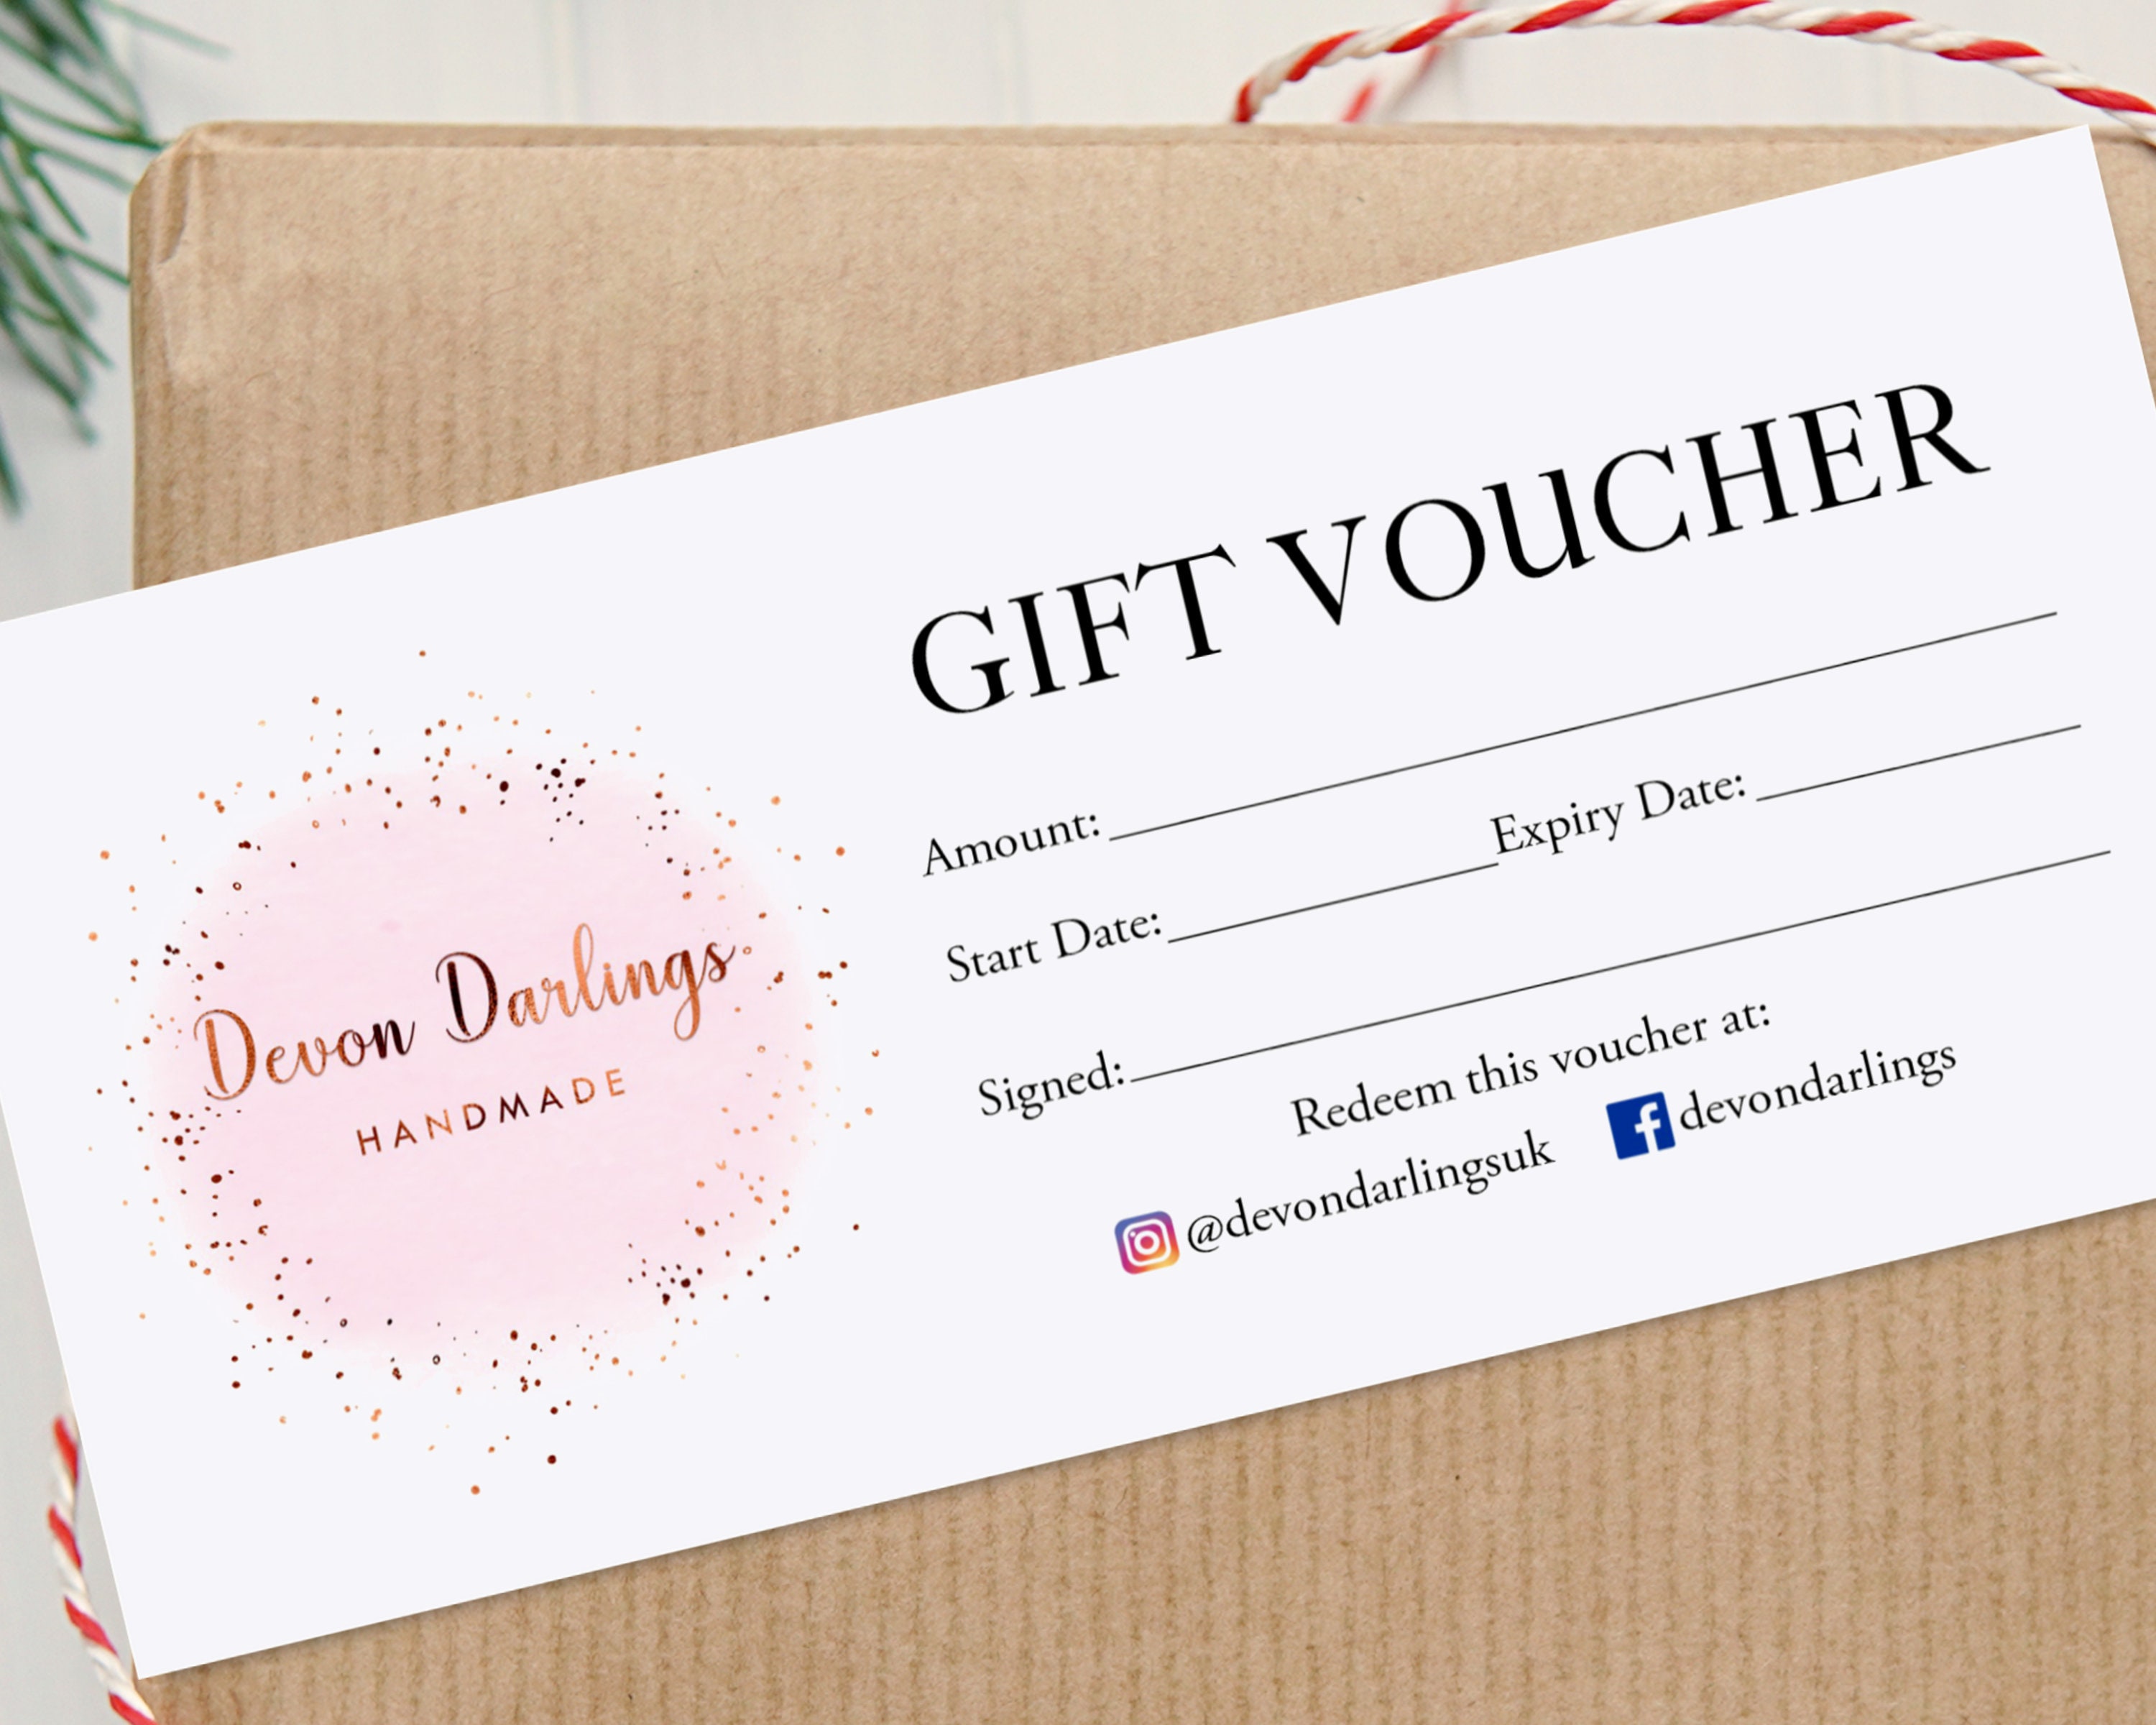 Chloes Creative Cards Gift Voucher